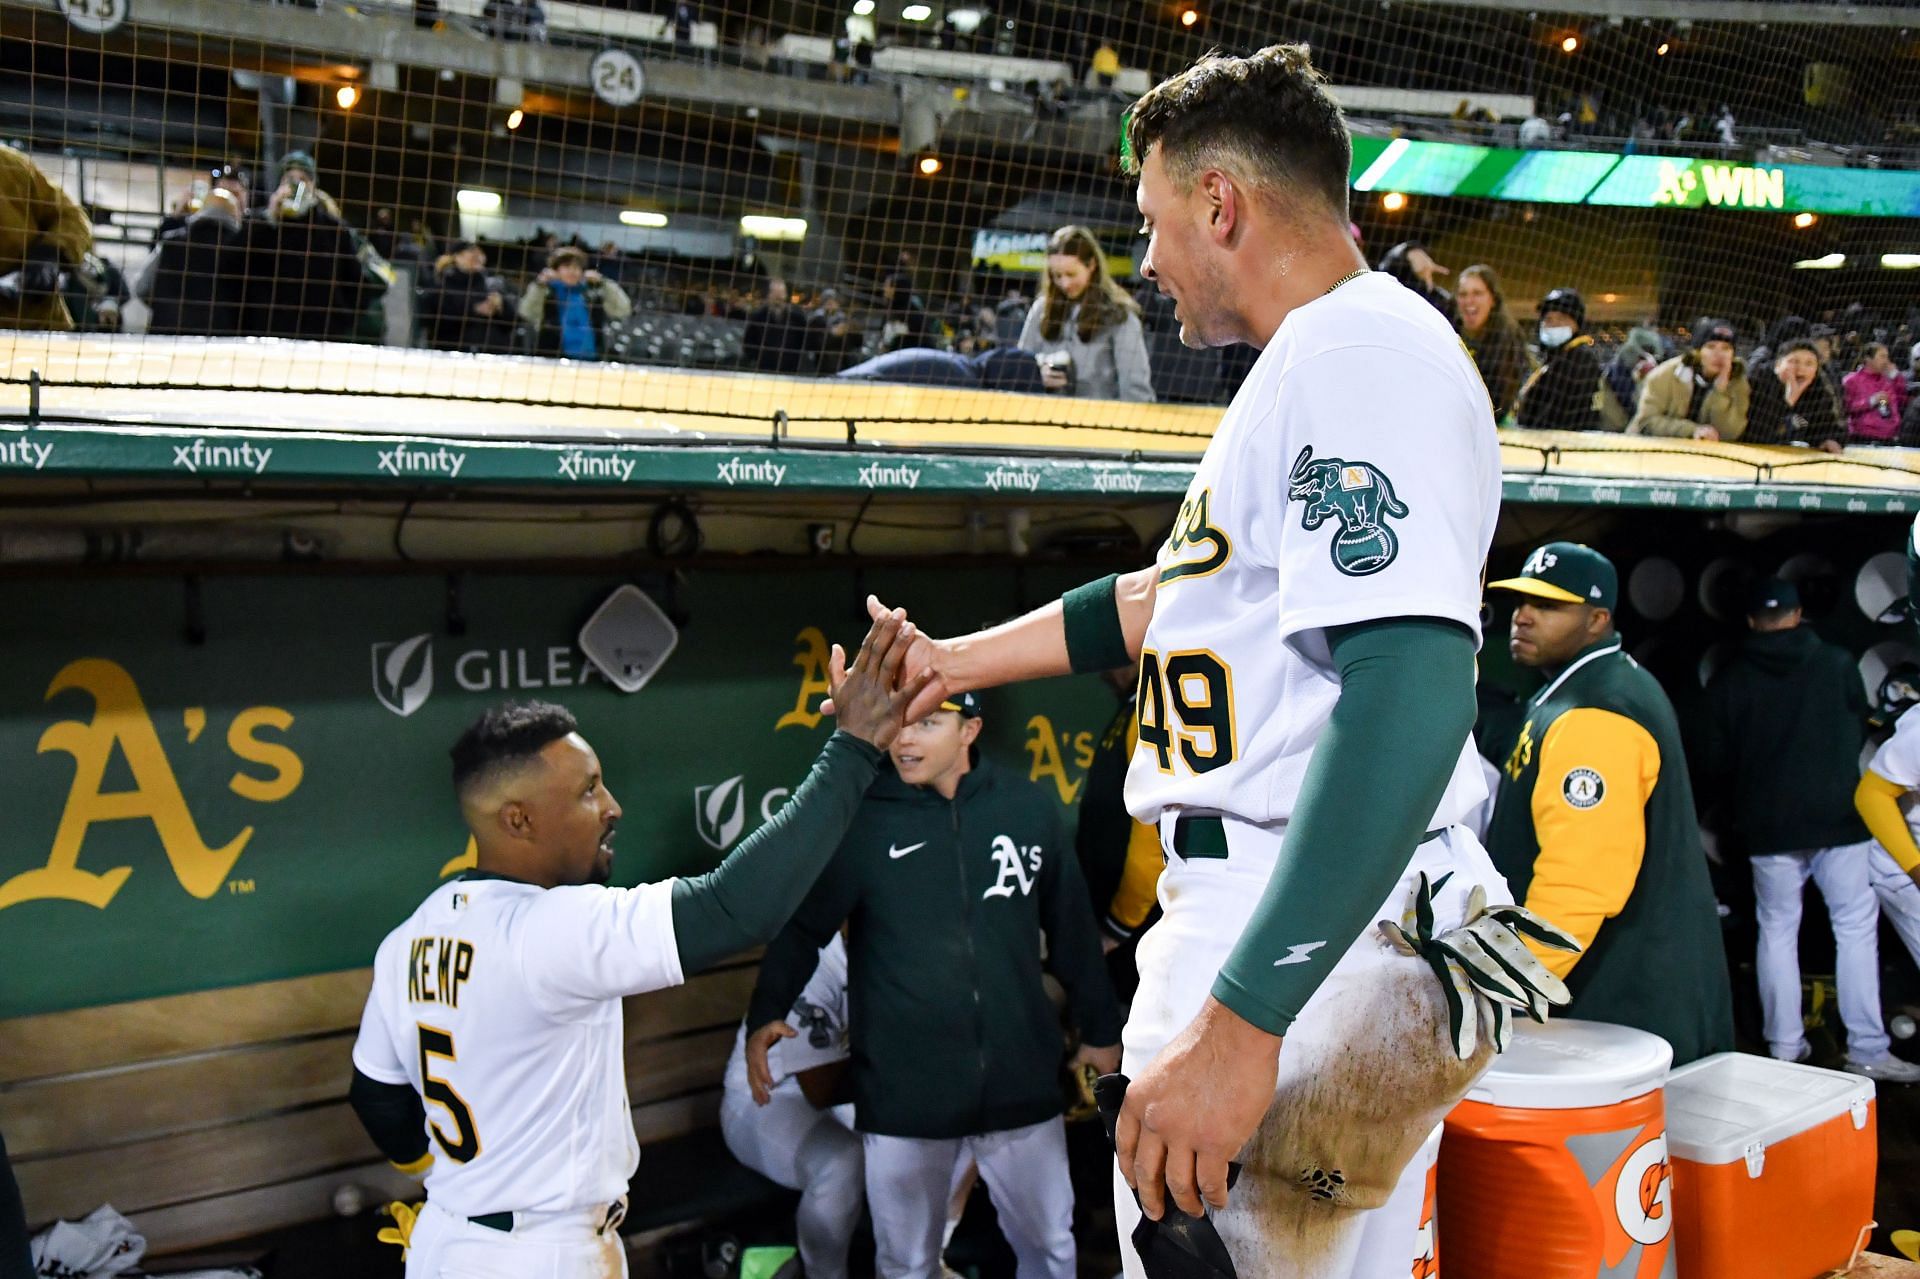 Oakland A's Game #43: A's hold on in Texas slugfest, win 10-6 over